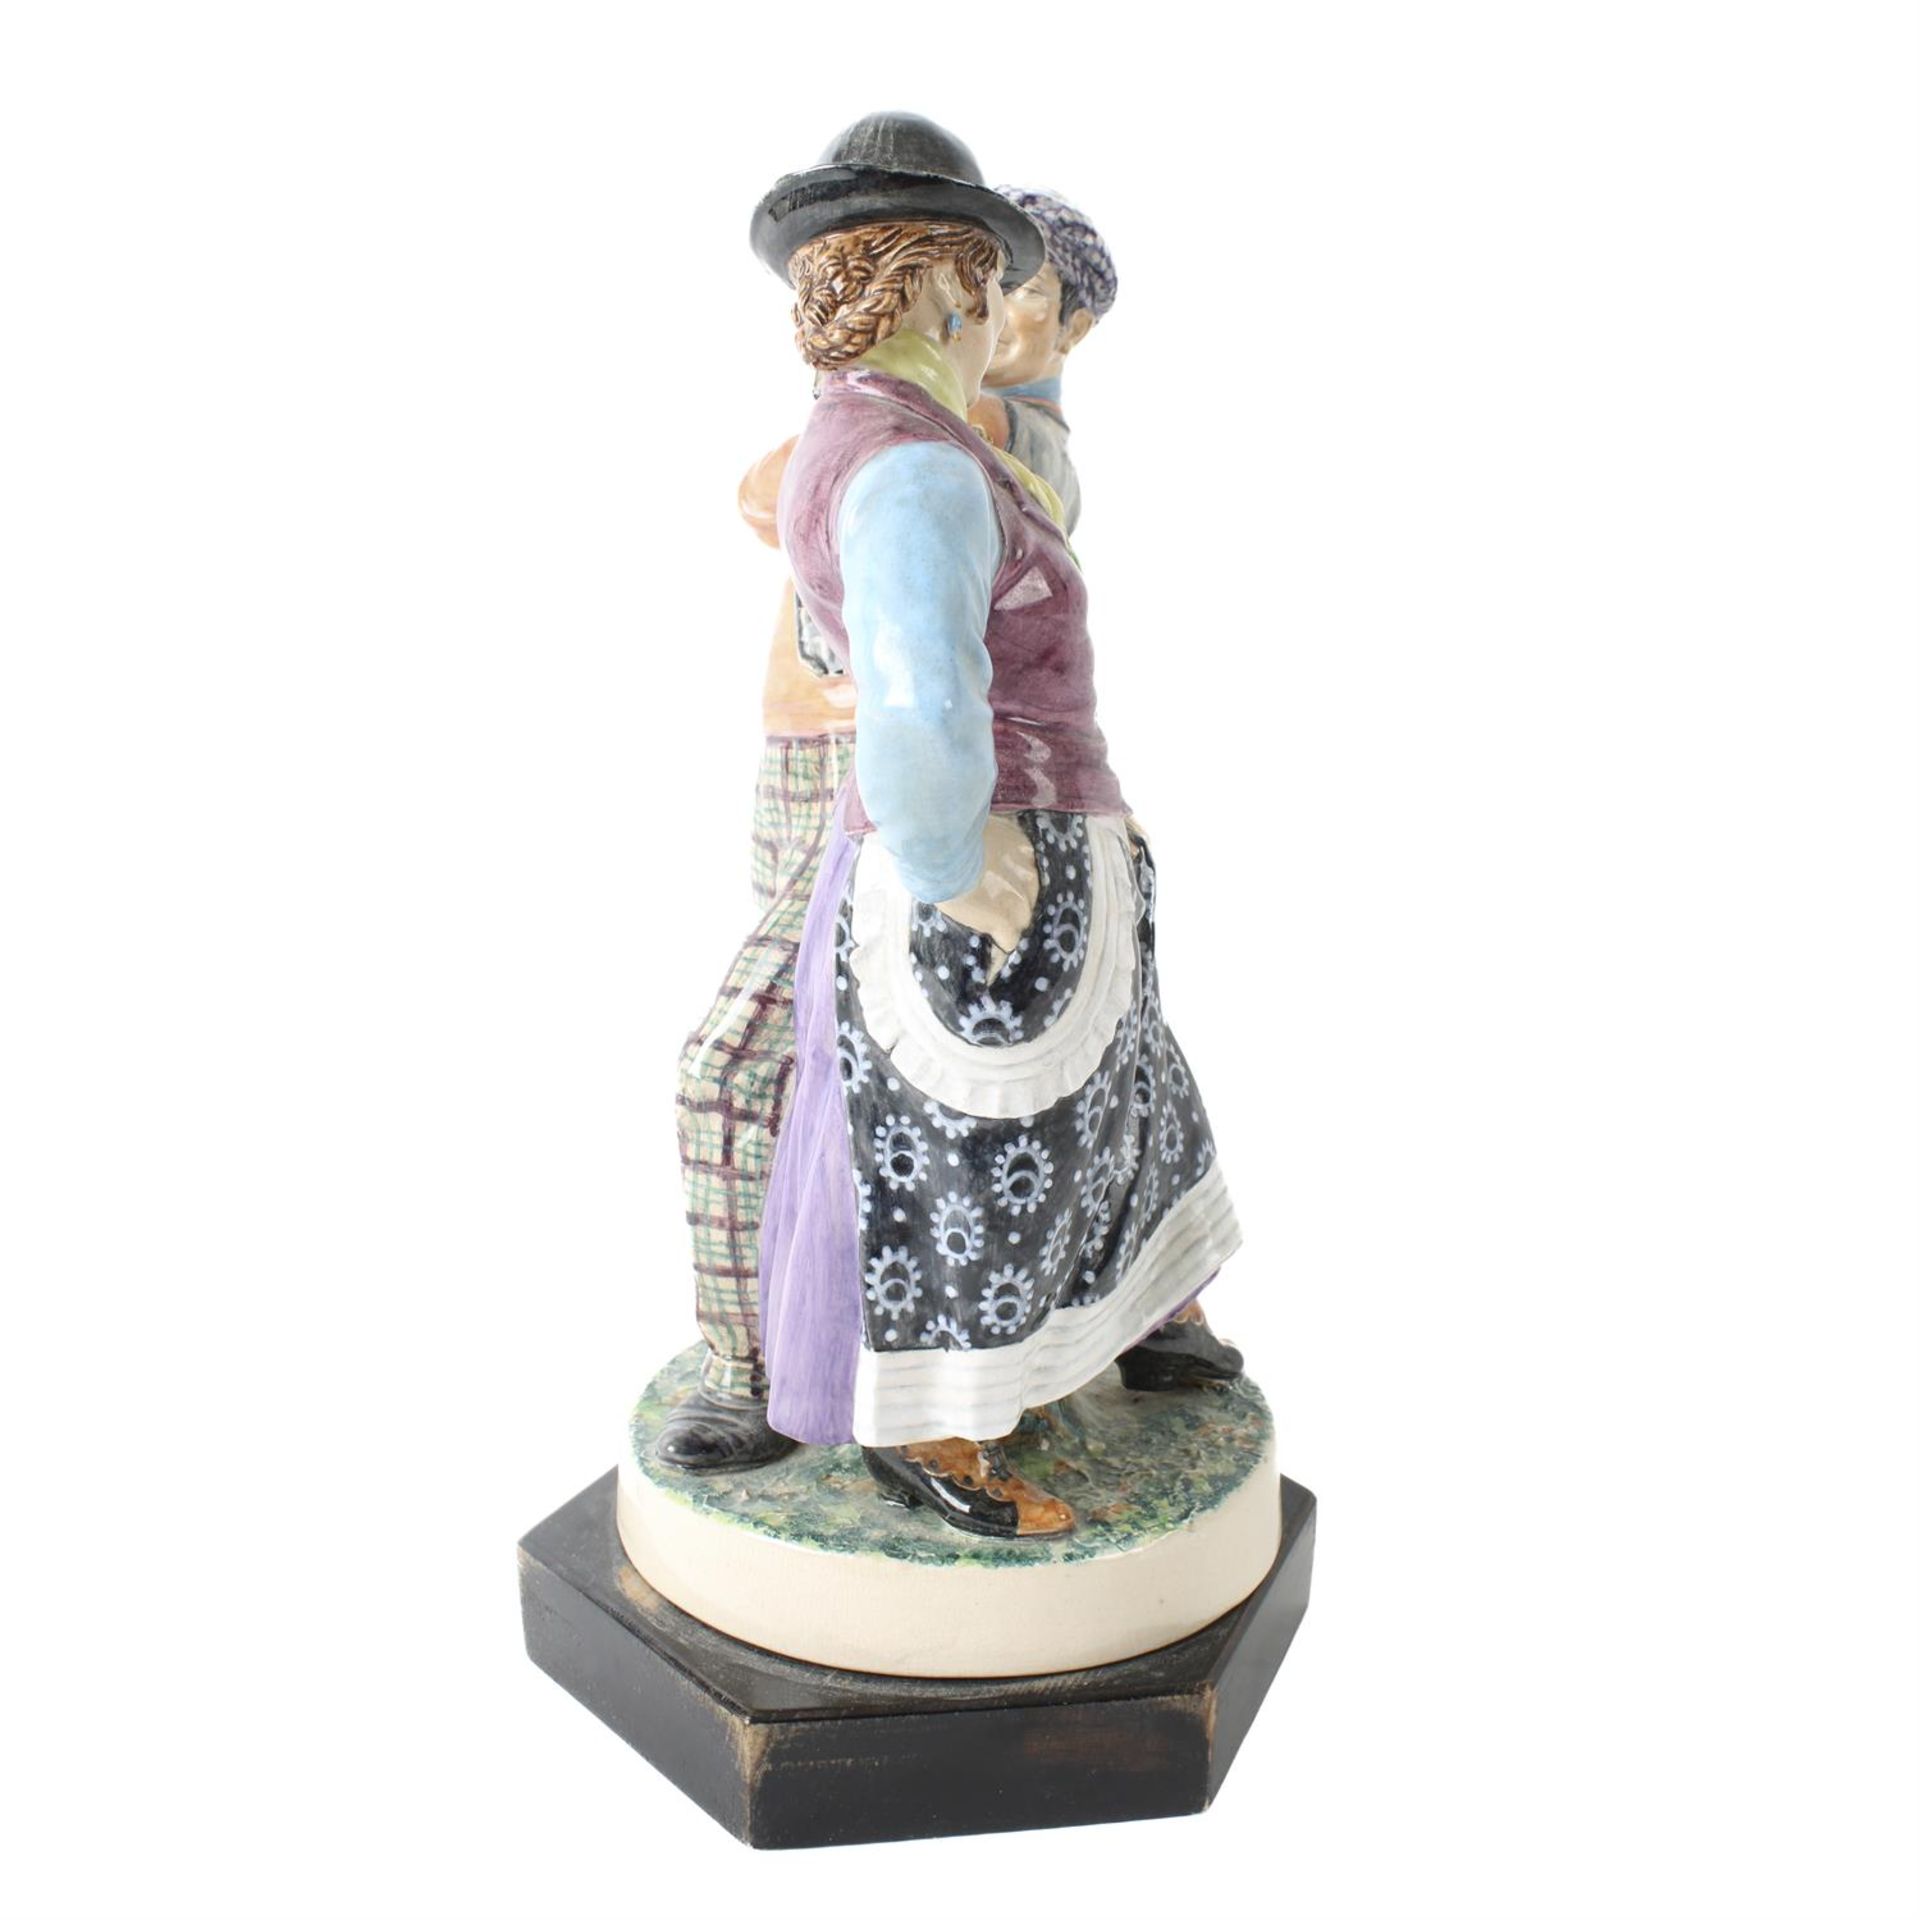 Charles Vyse 'The Dancing Gypsies' figural group - Image 8 of 9